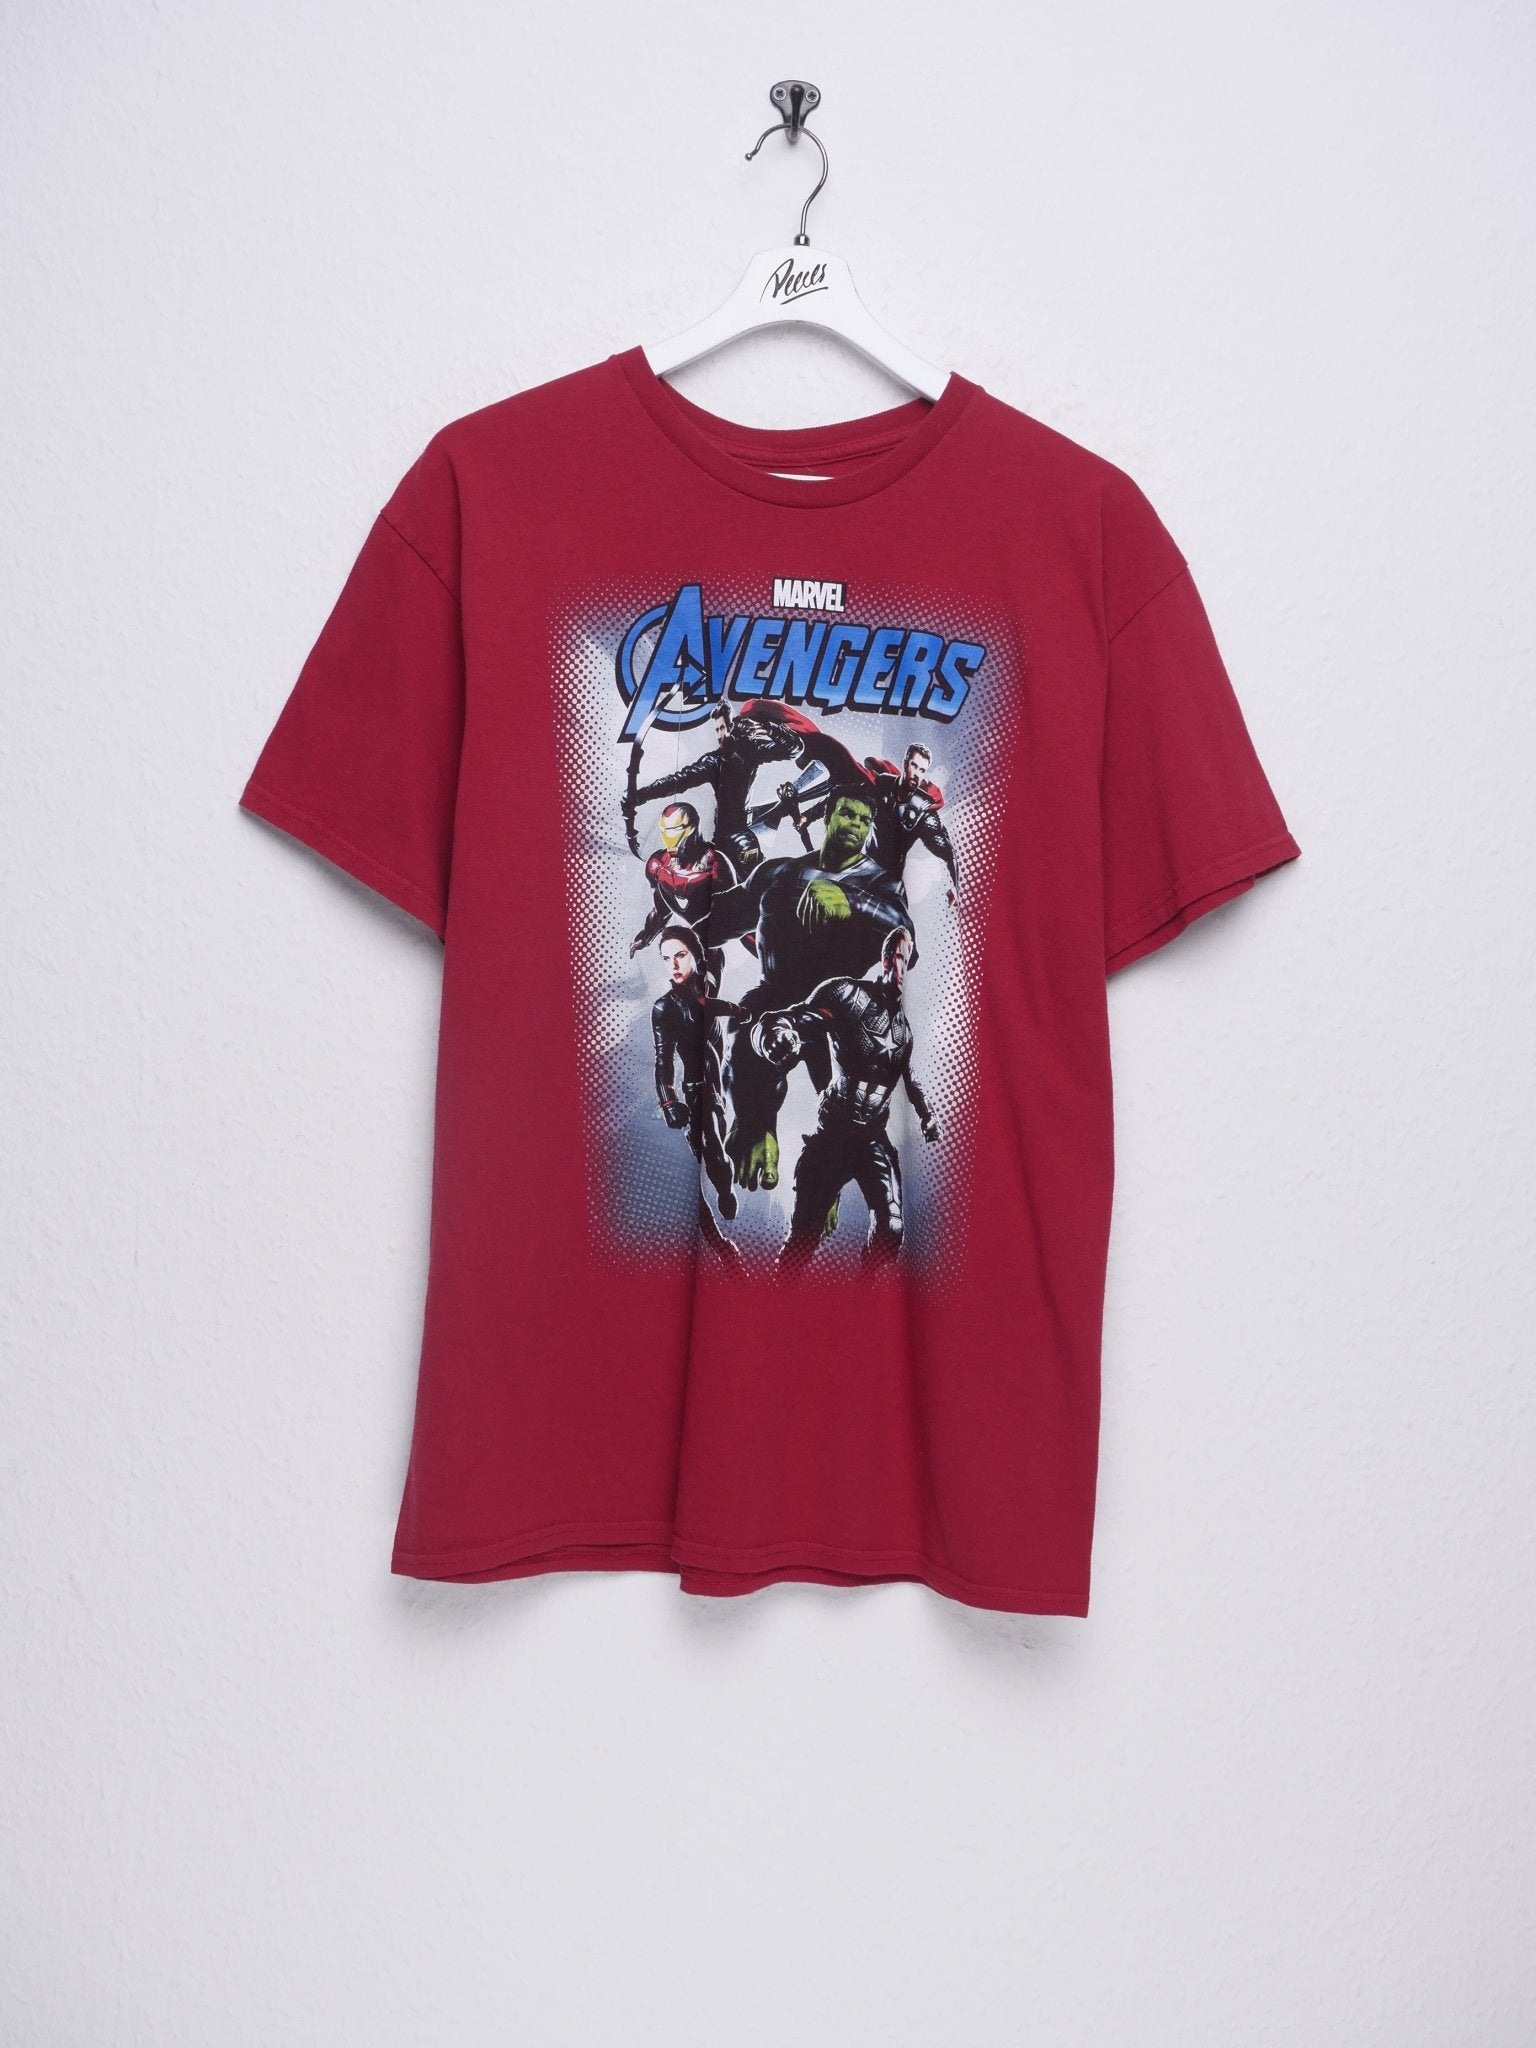 printed Marvel Avengers Graphic red Shirt - Peeces